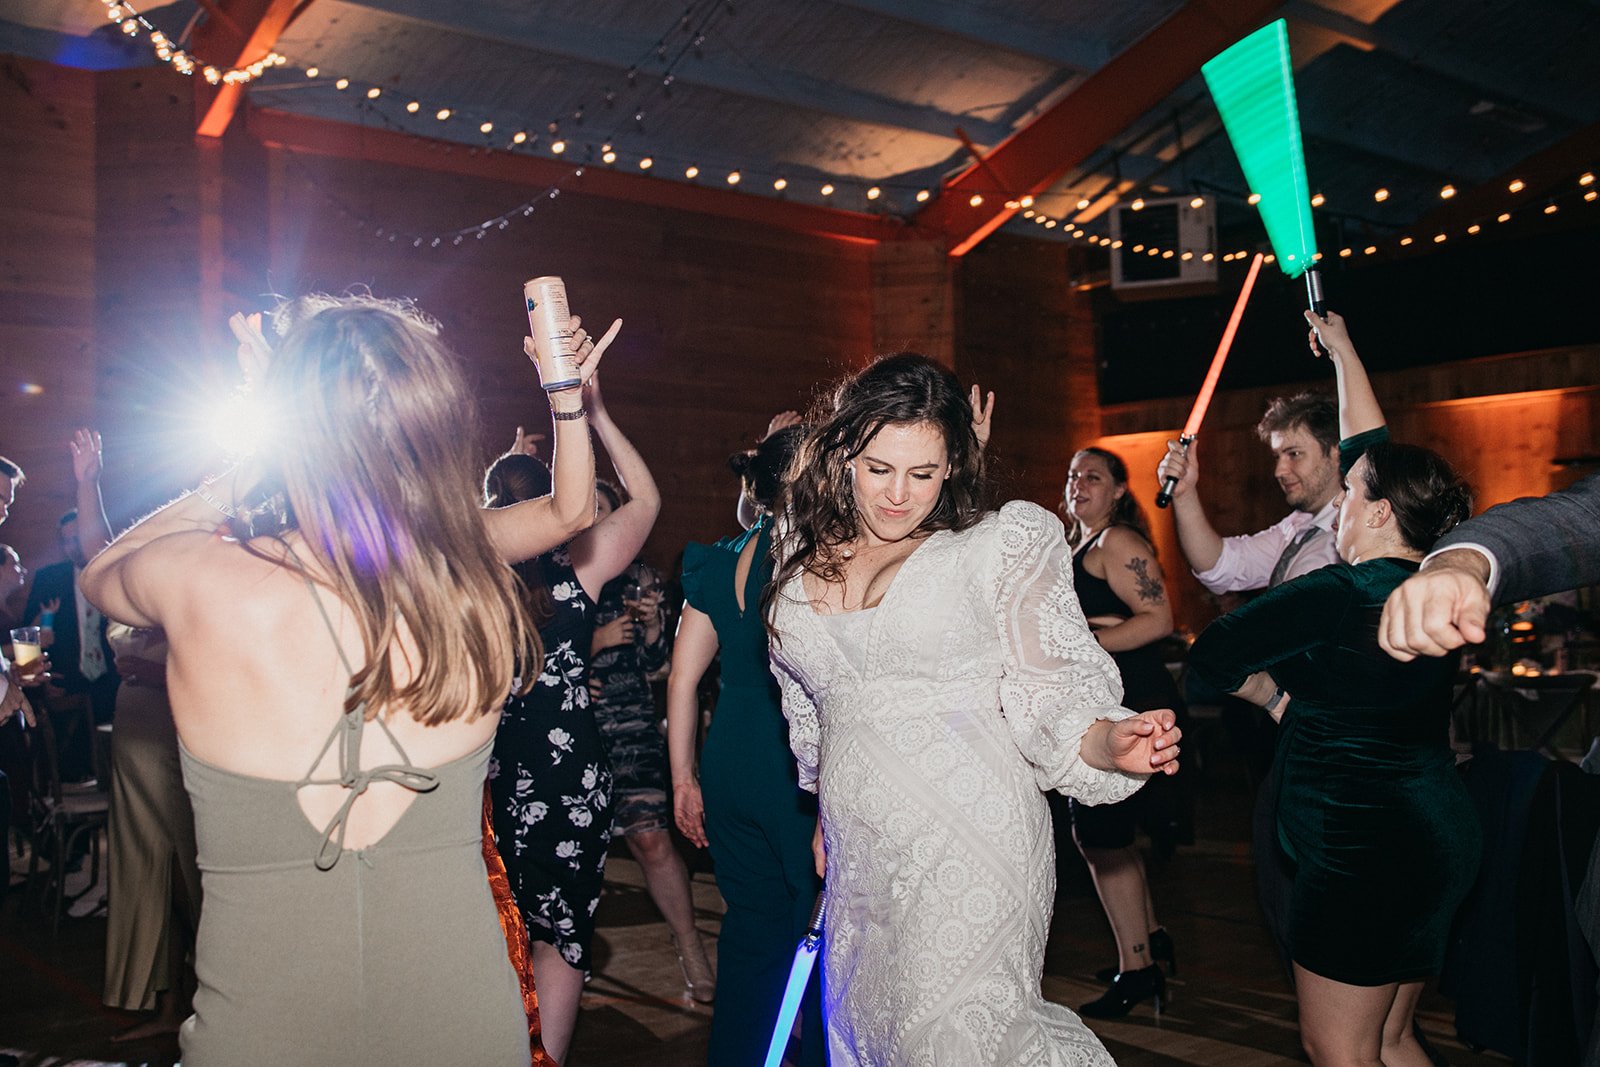 Dancing at wedding reception, with a green lightsaber in the background.